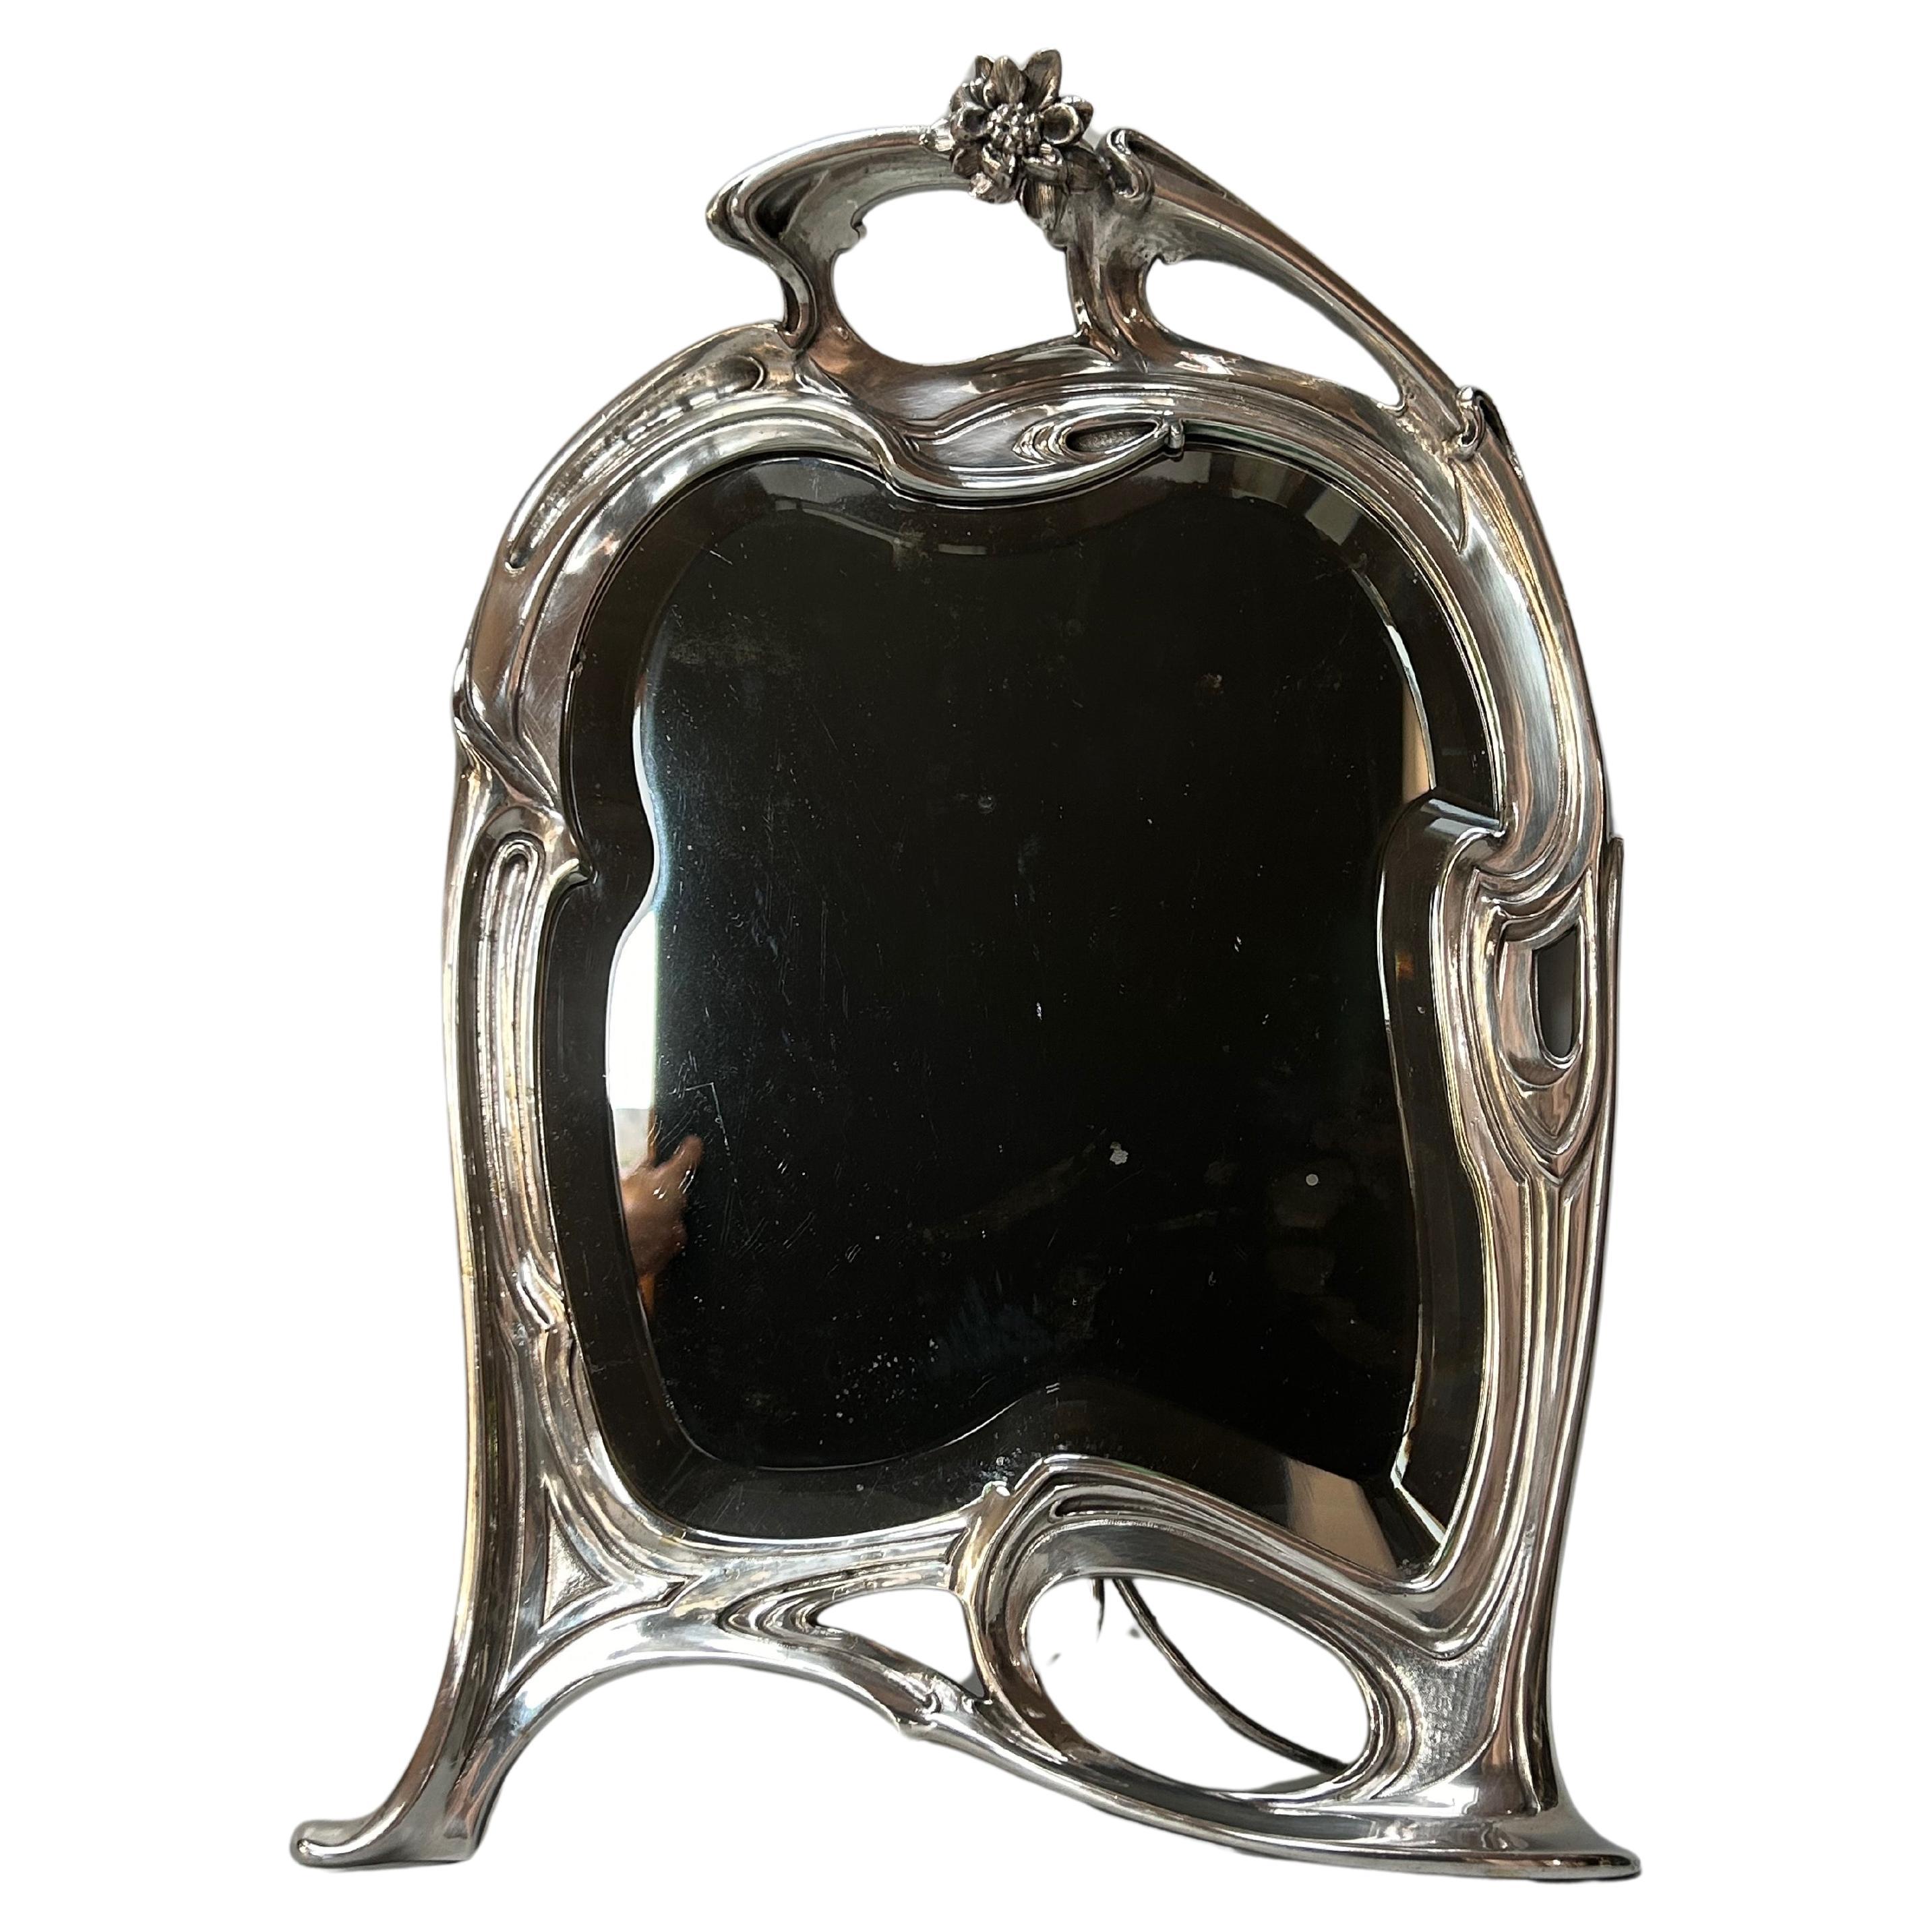 Art Nouveau silvered bronze mirror circa 1900.
In very good condition.
No trace of stamping or marking.
This mirror is authentic.
A few small stains on the mirror should be noted.

Height: 46.5 cm
Width: 32 cm
Depth unfolded: 21 cm
Weight: 4 Kg